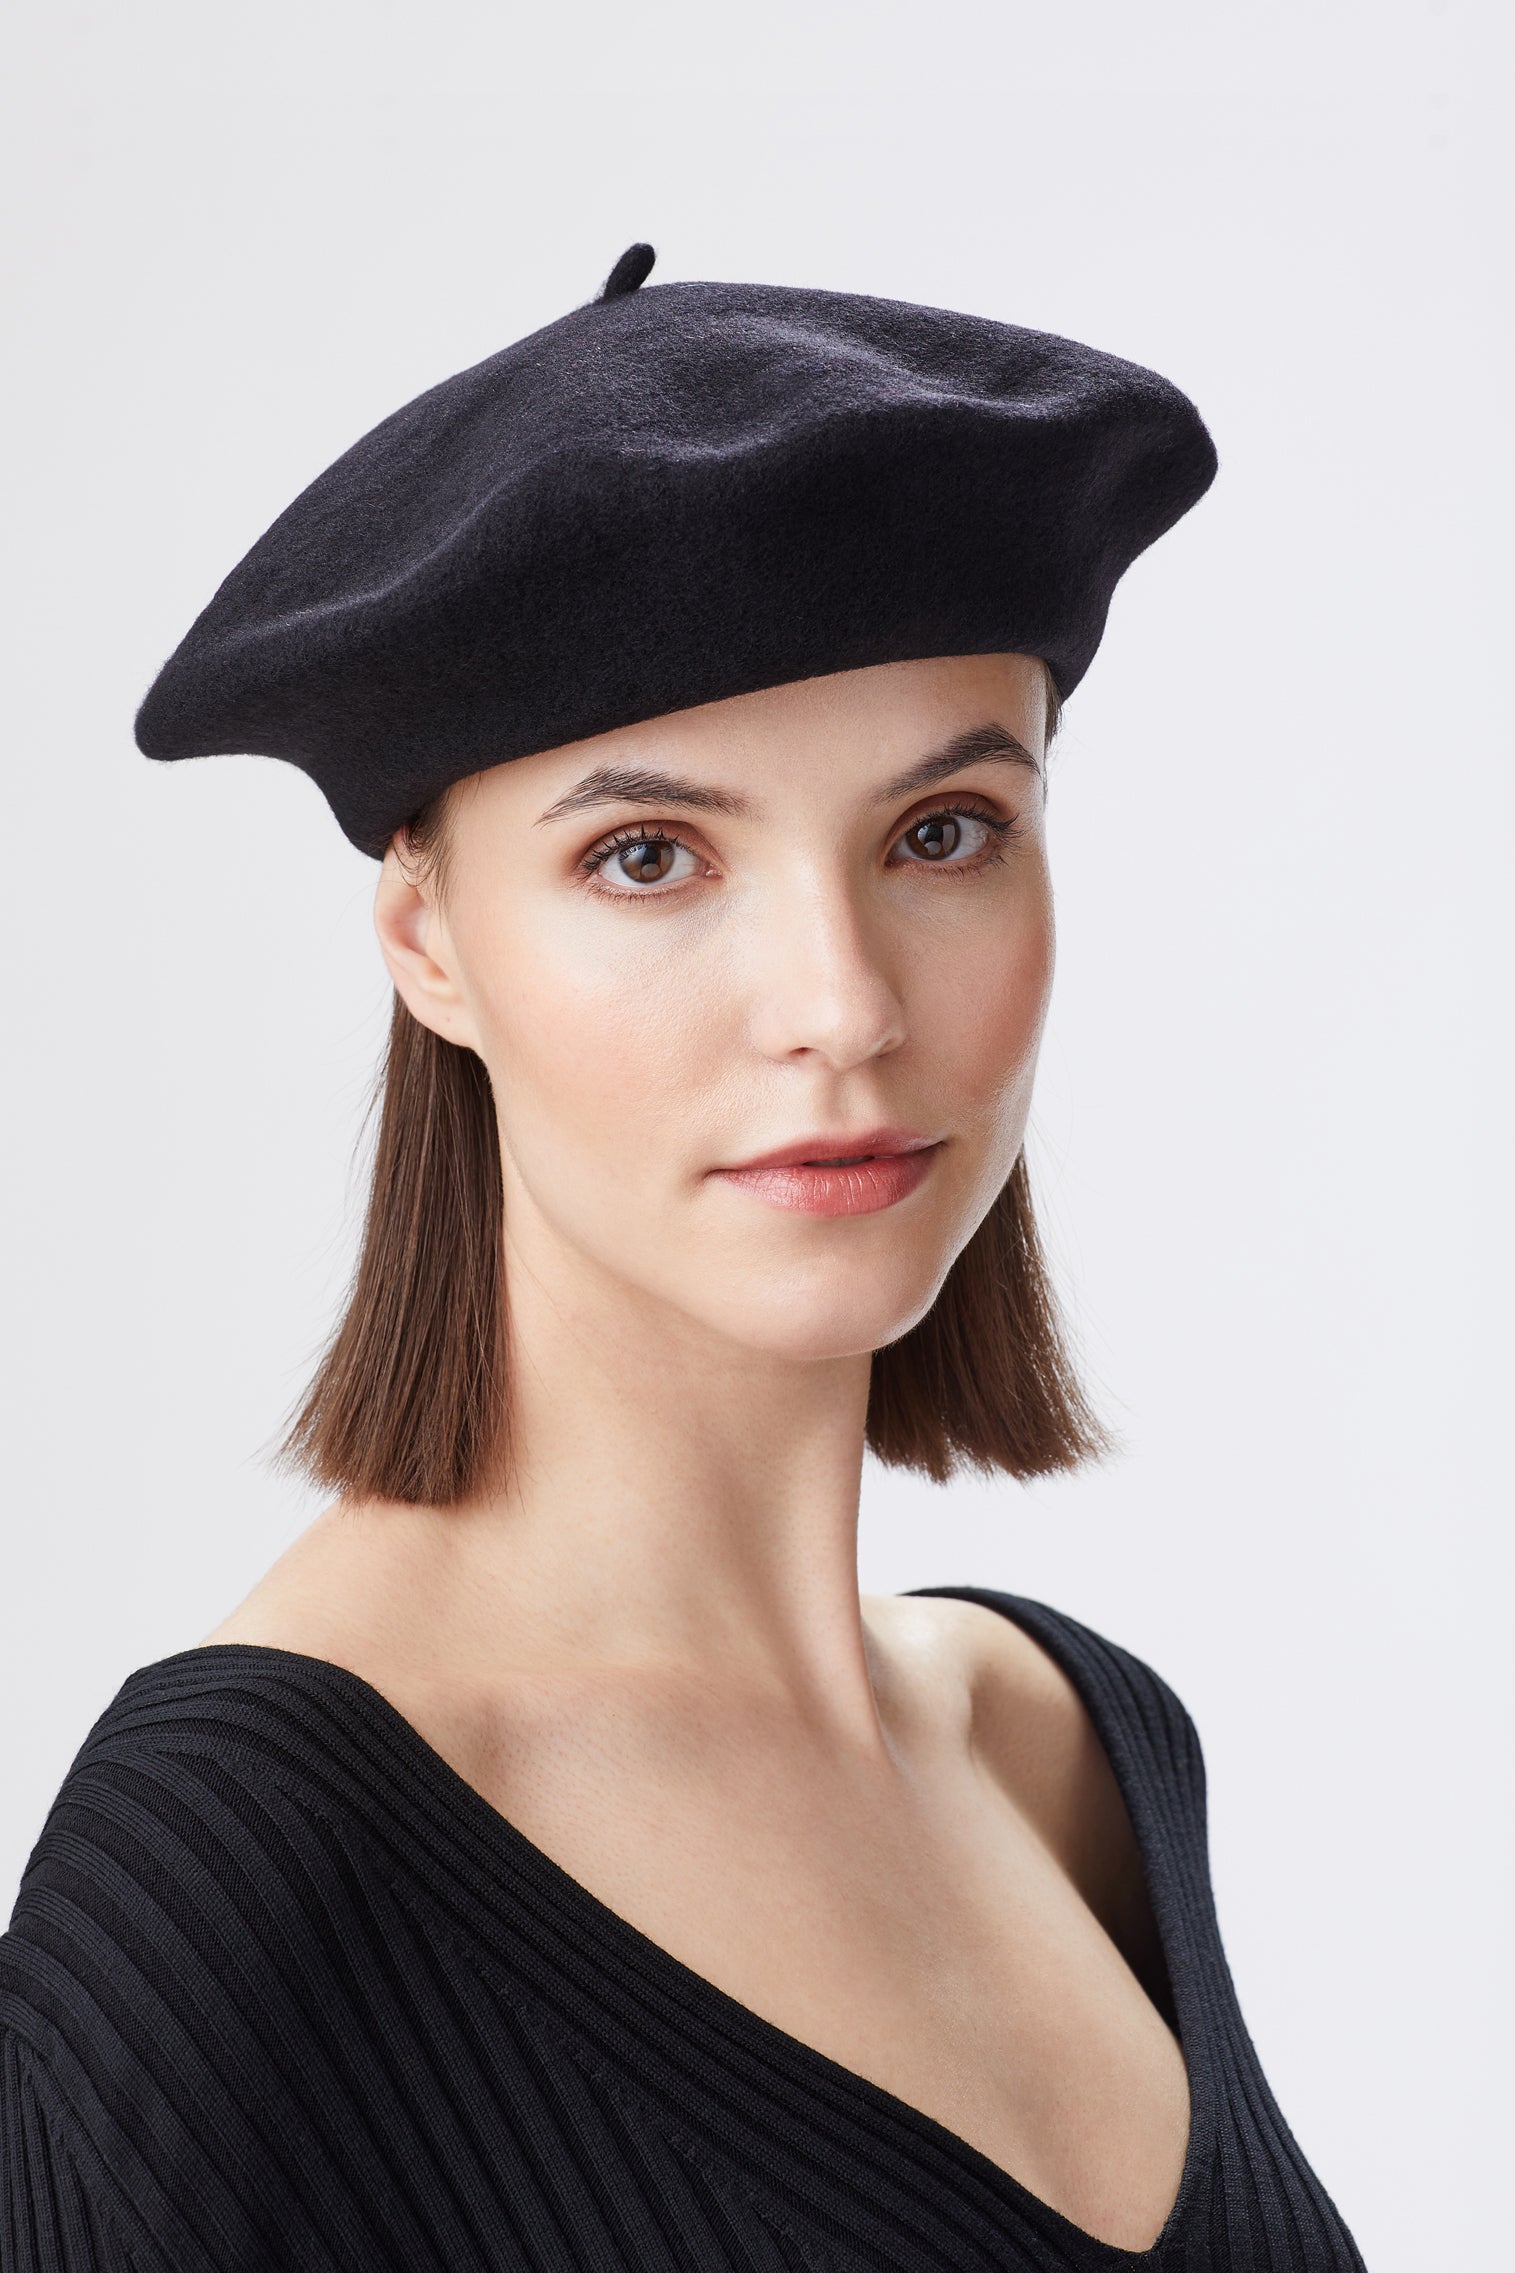 French Beret - Products - Lock & Co. Hatters London UK